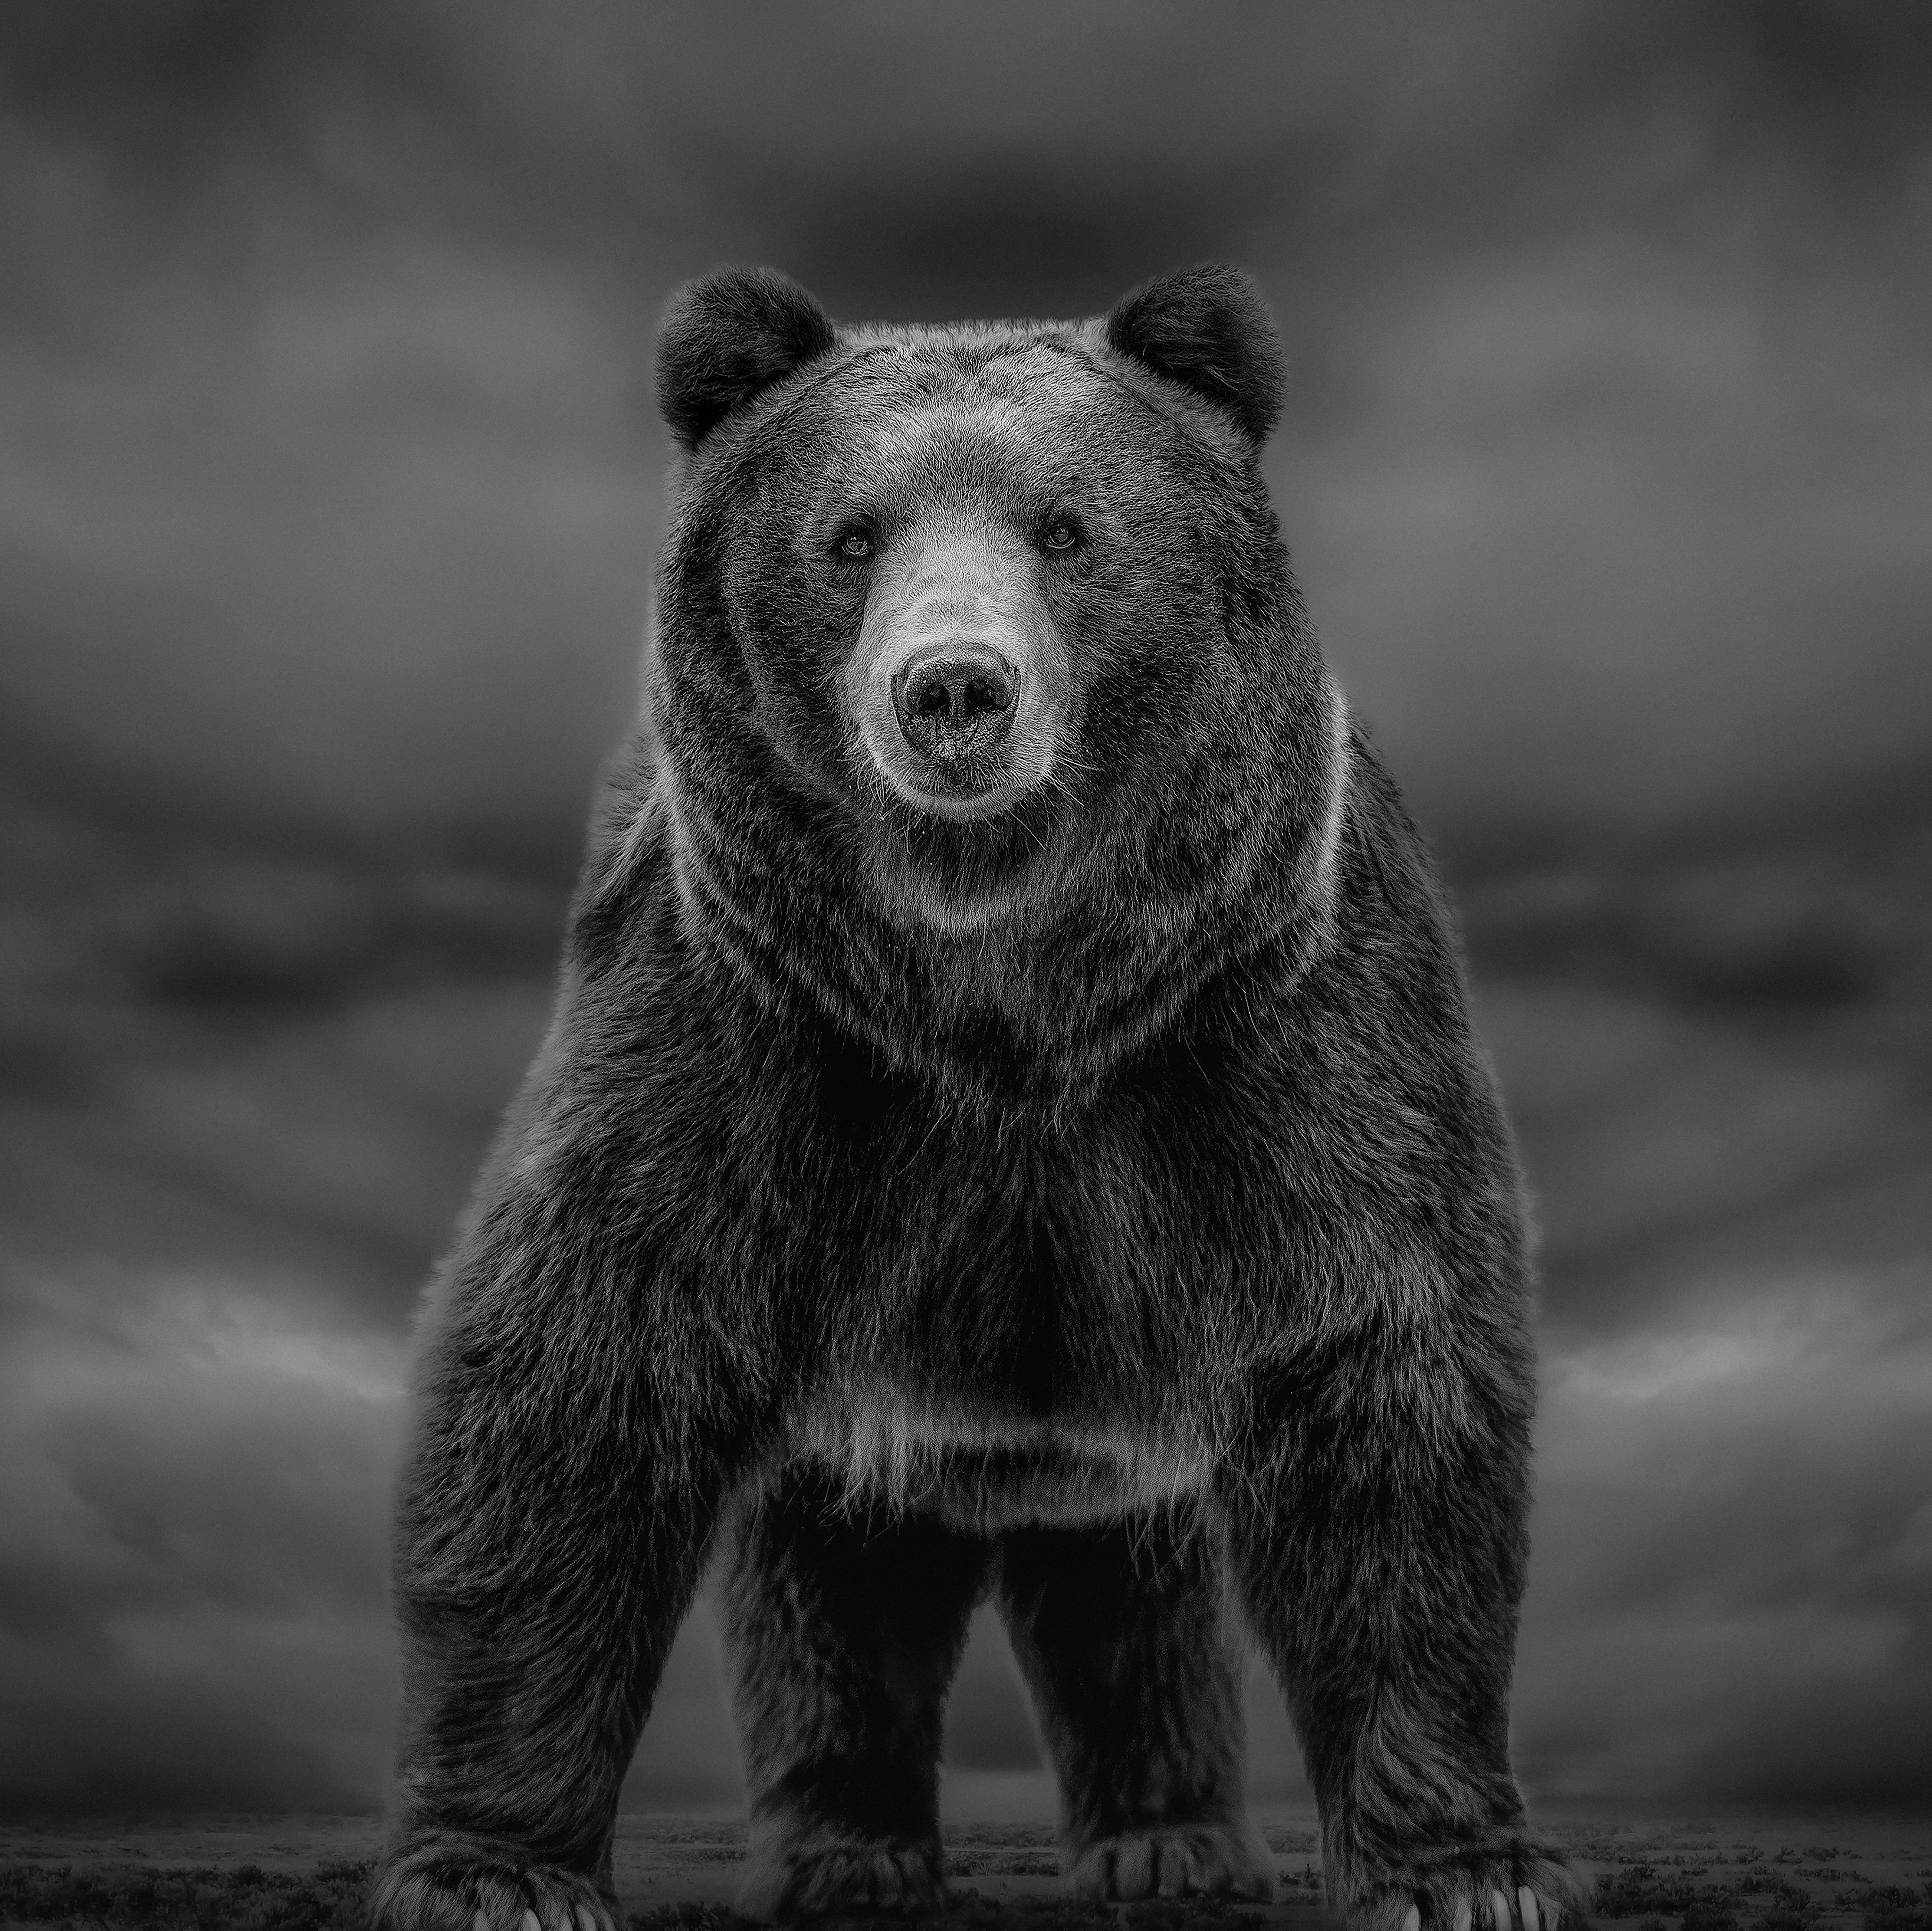 Shane Russeck Animal Print - 12x12  Black and White Photography of a Kodiak , Grizzly Bear Fine Art Photograph